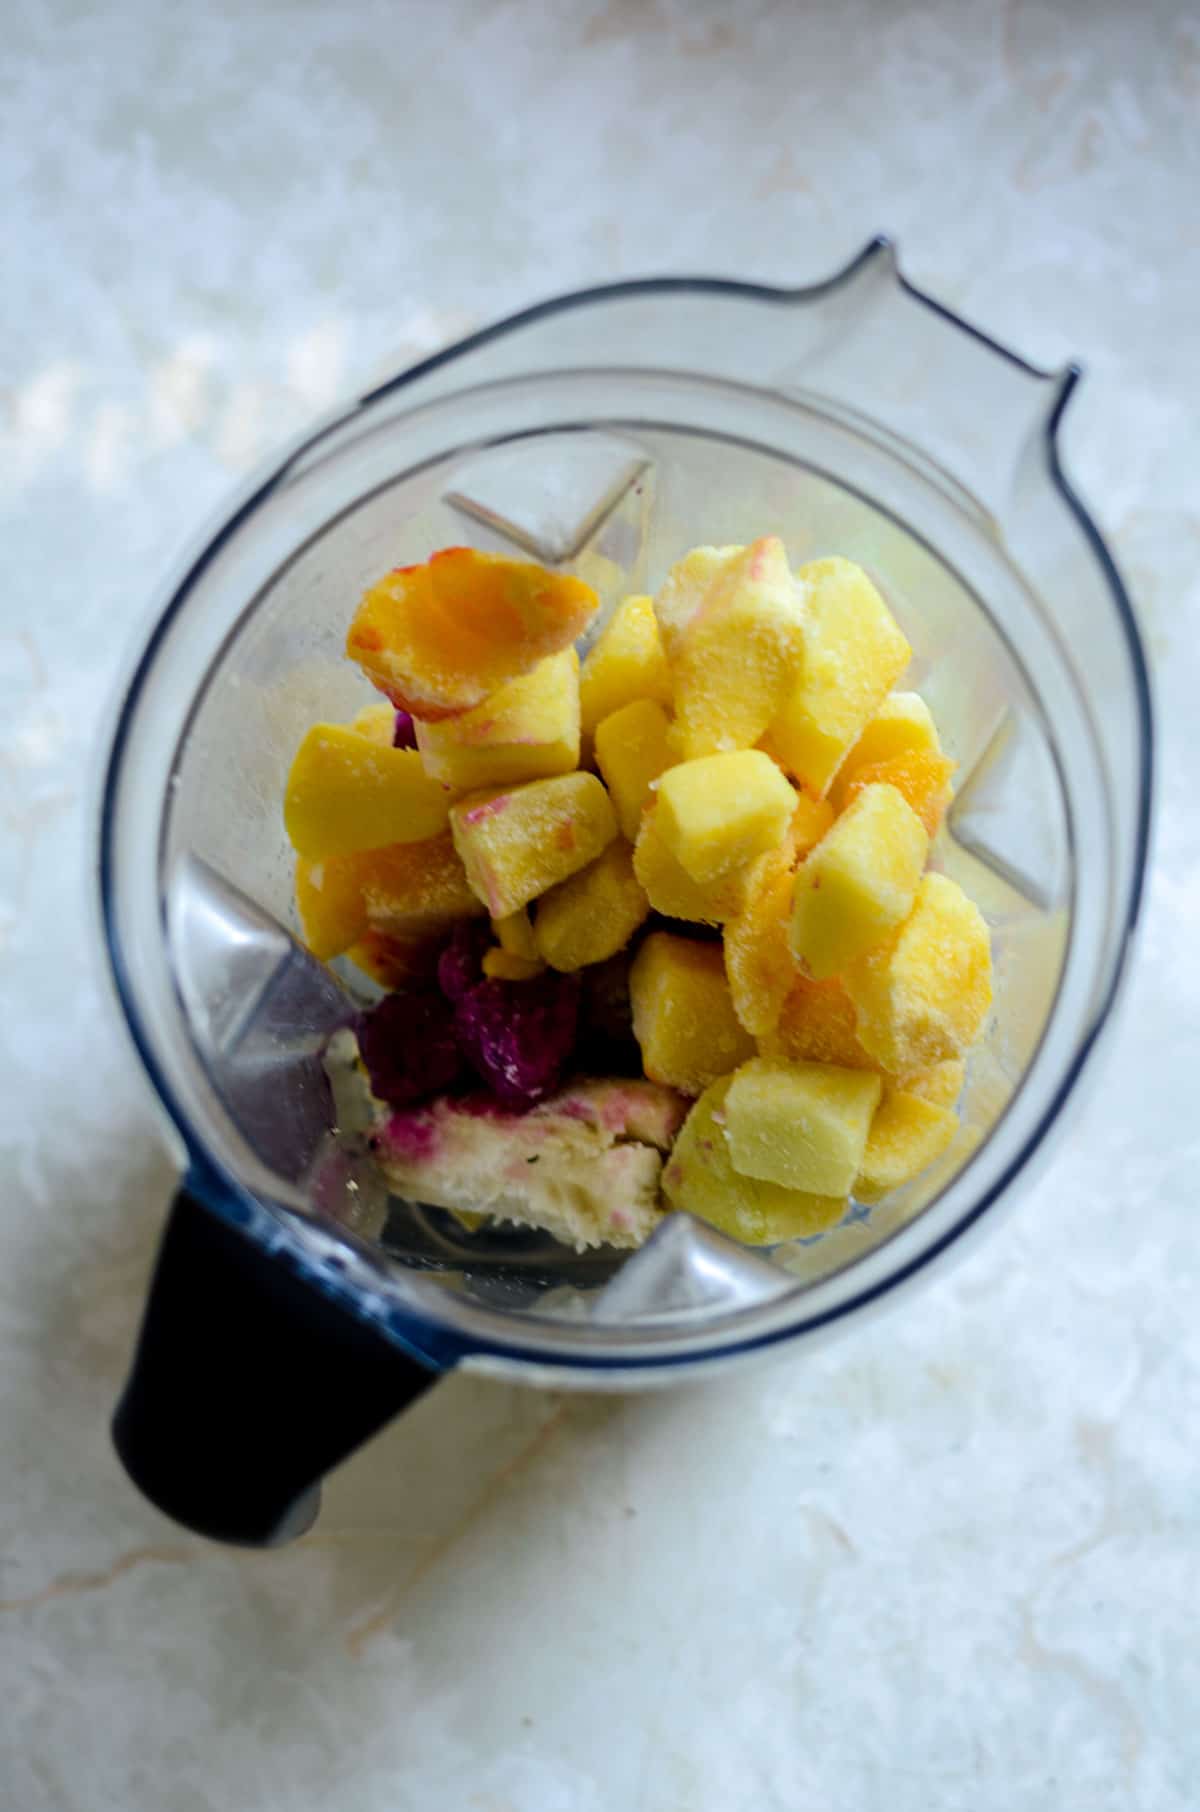 Banana, dragon fruit, pineapple, and hemp hearts in the blender for a smoothie.